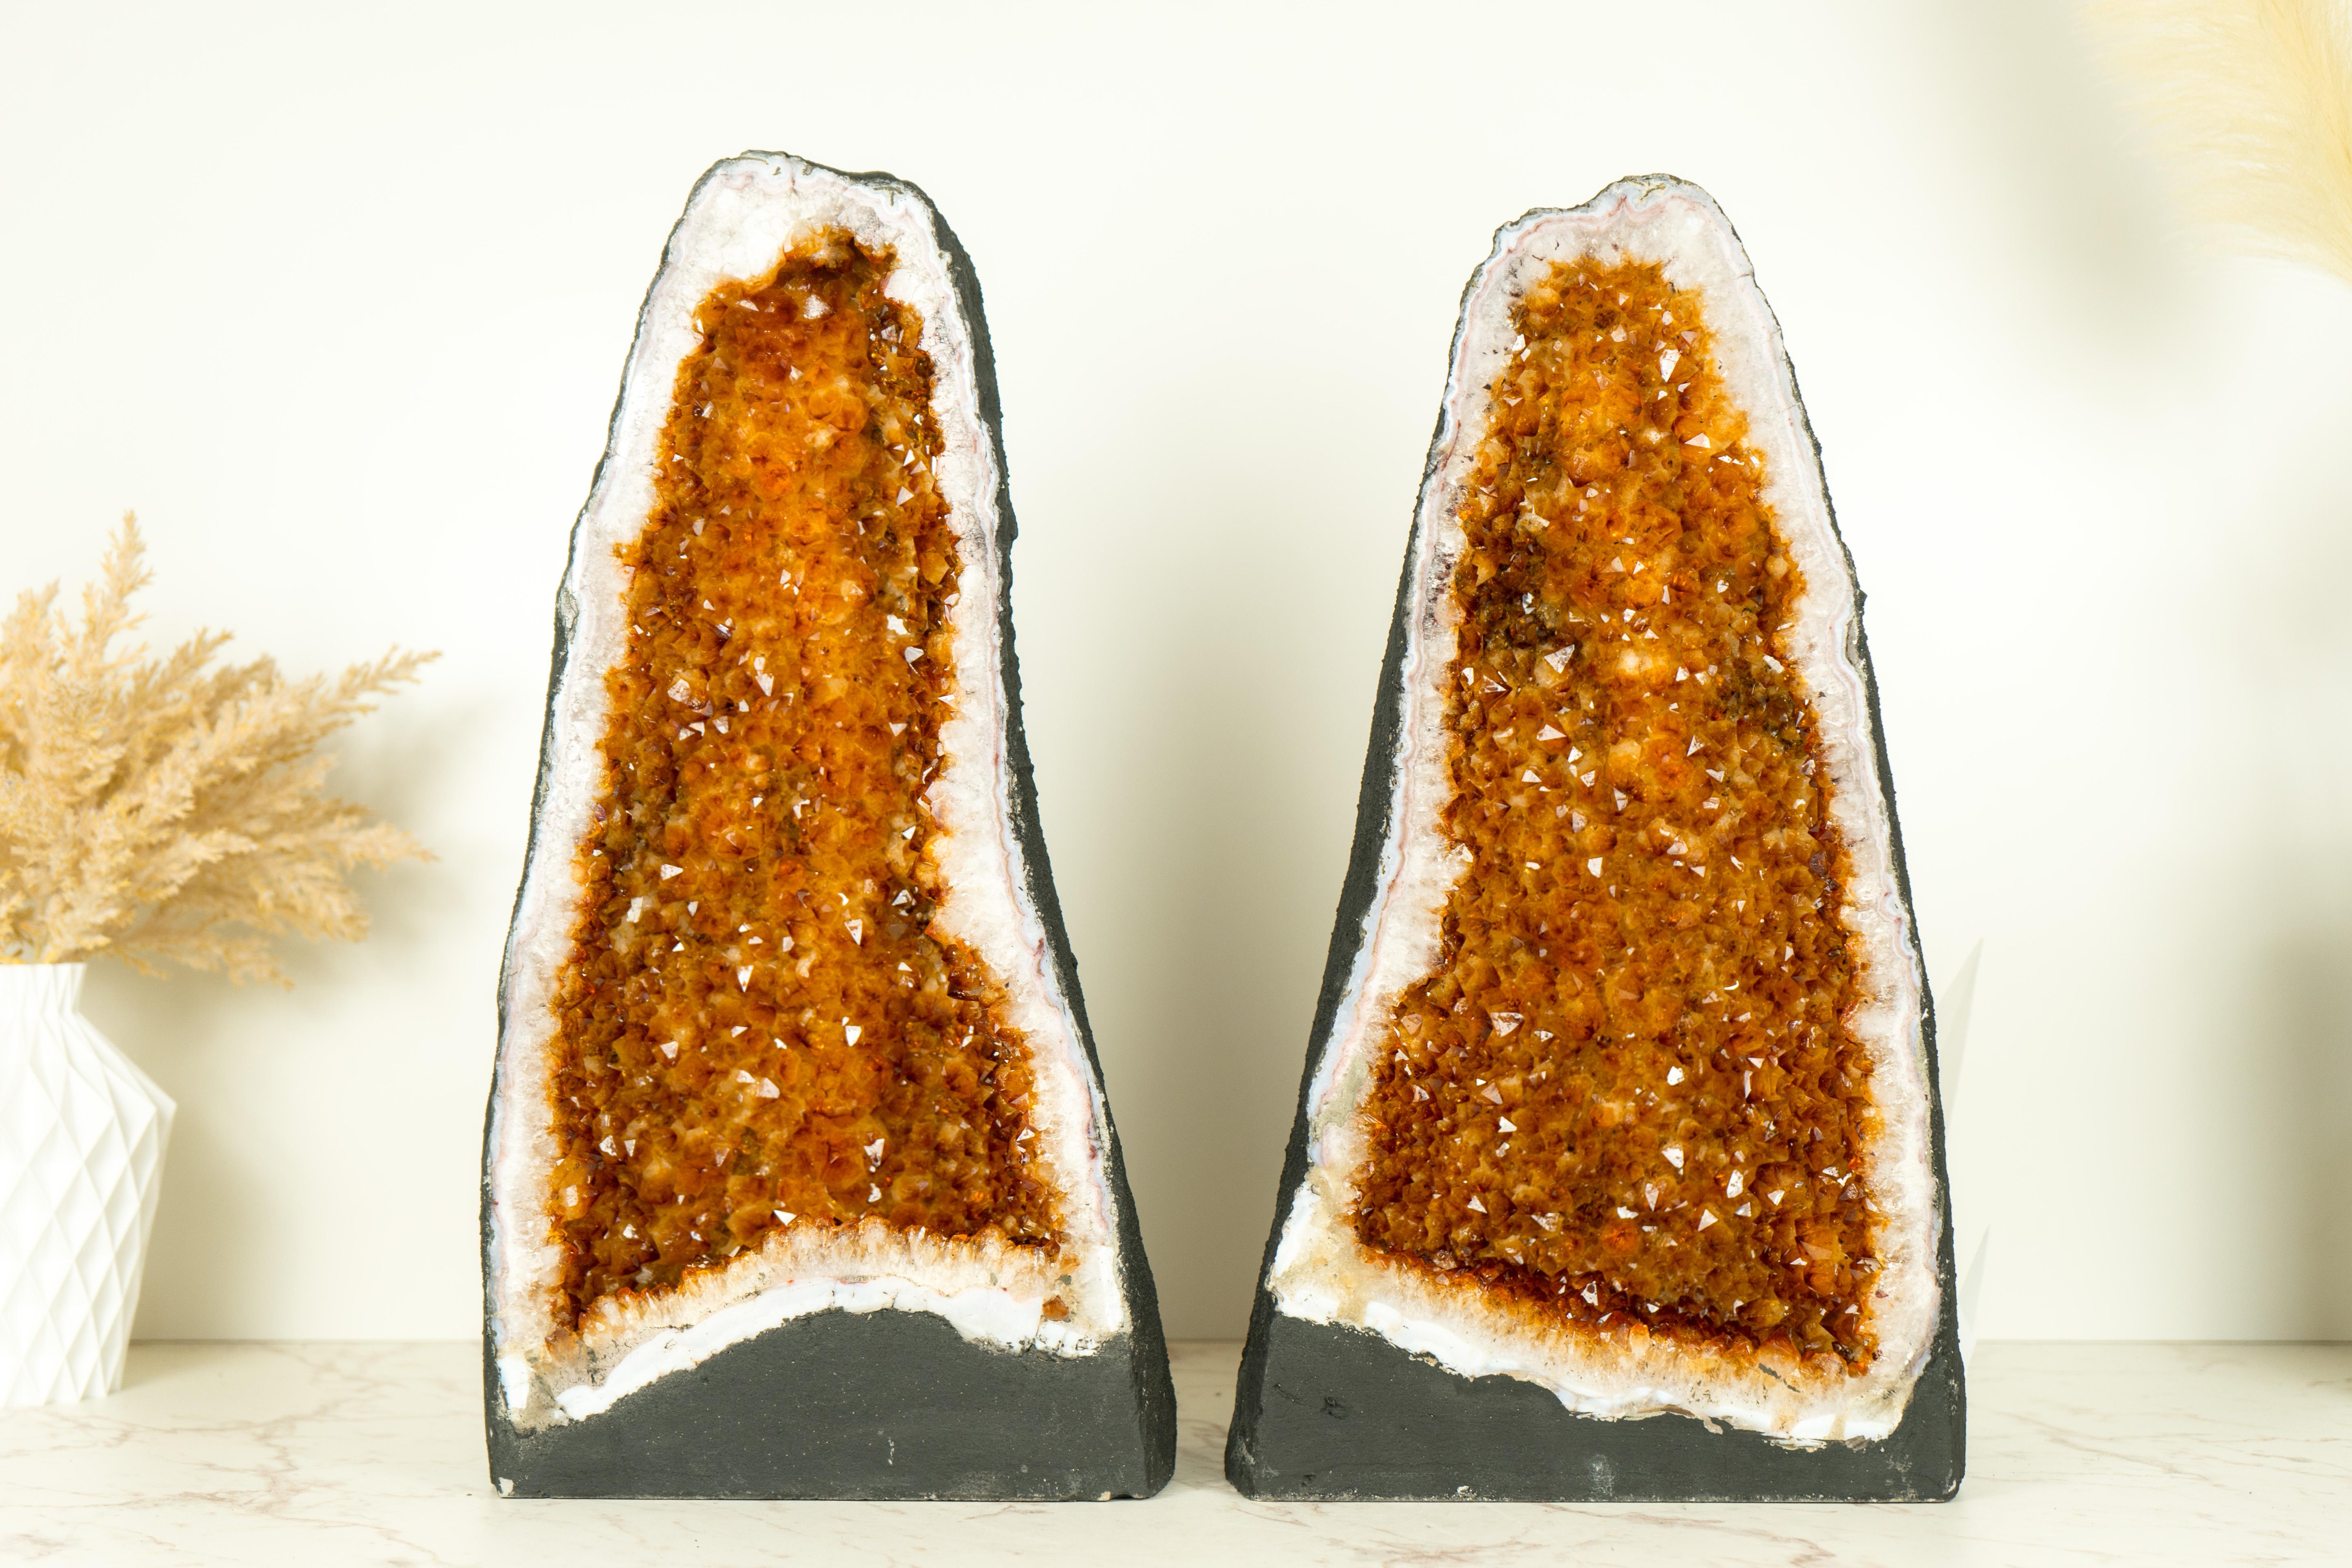 With its perfectly formed Geode Cathedral format and shimmering AAA-grade orange citrine druzy, this pair of Citrine Geodes will undoubtedly elevate the aesthetic of any environment, whether as a centerpiece in your collection or a captivating focal